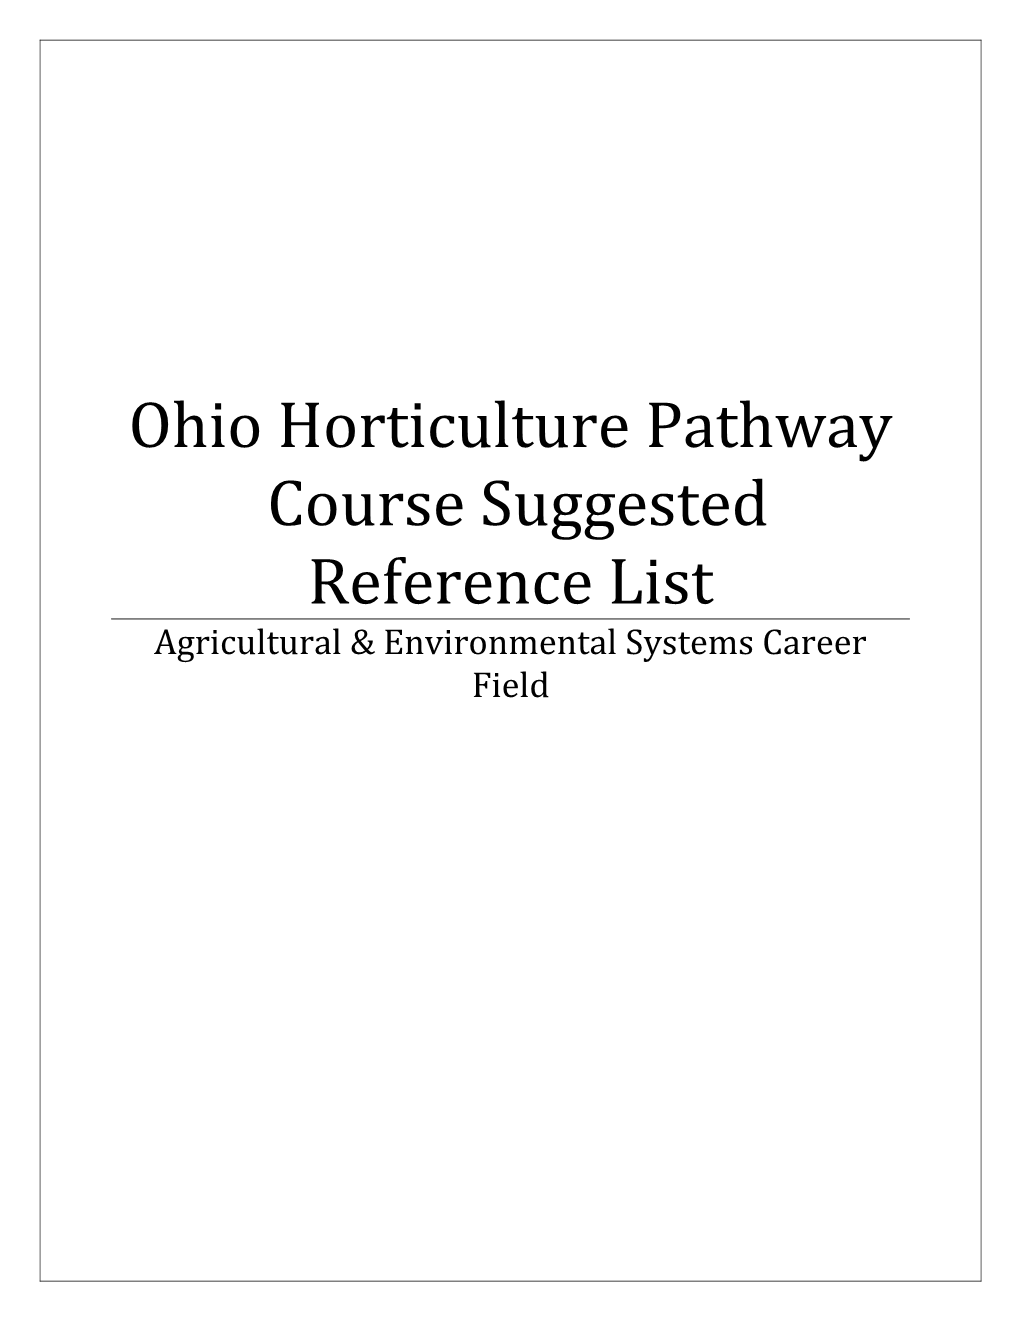 Horticulture Course Reference List